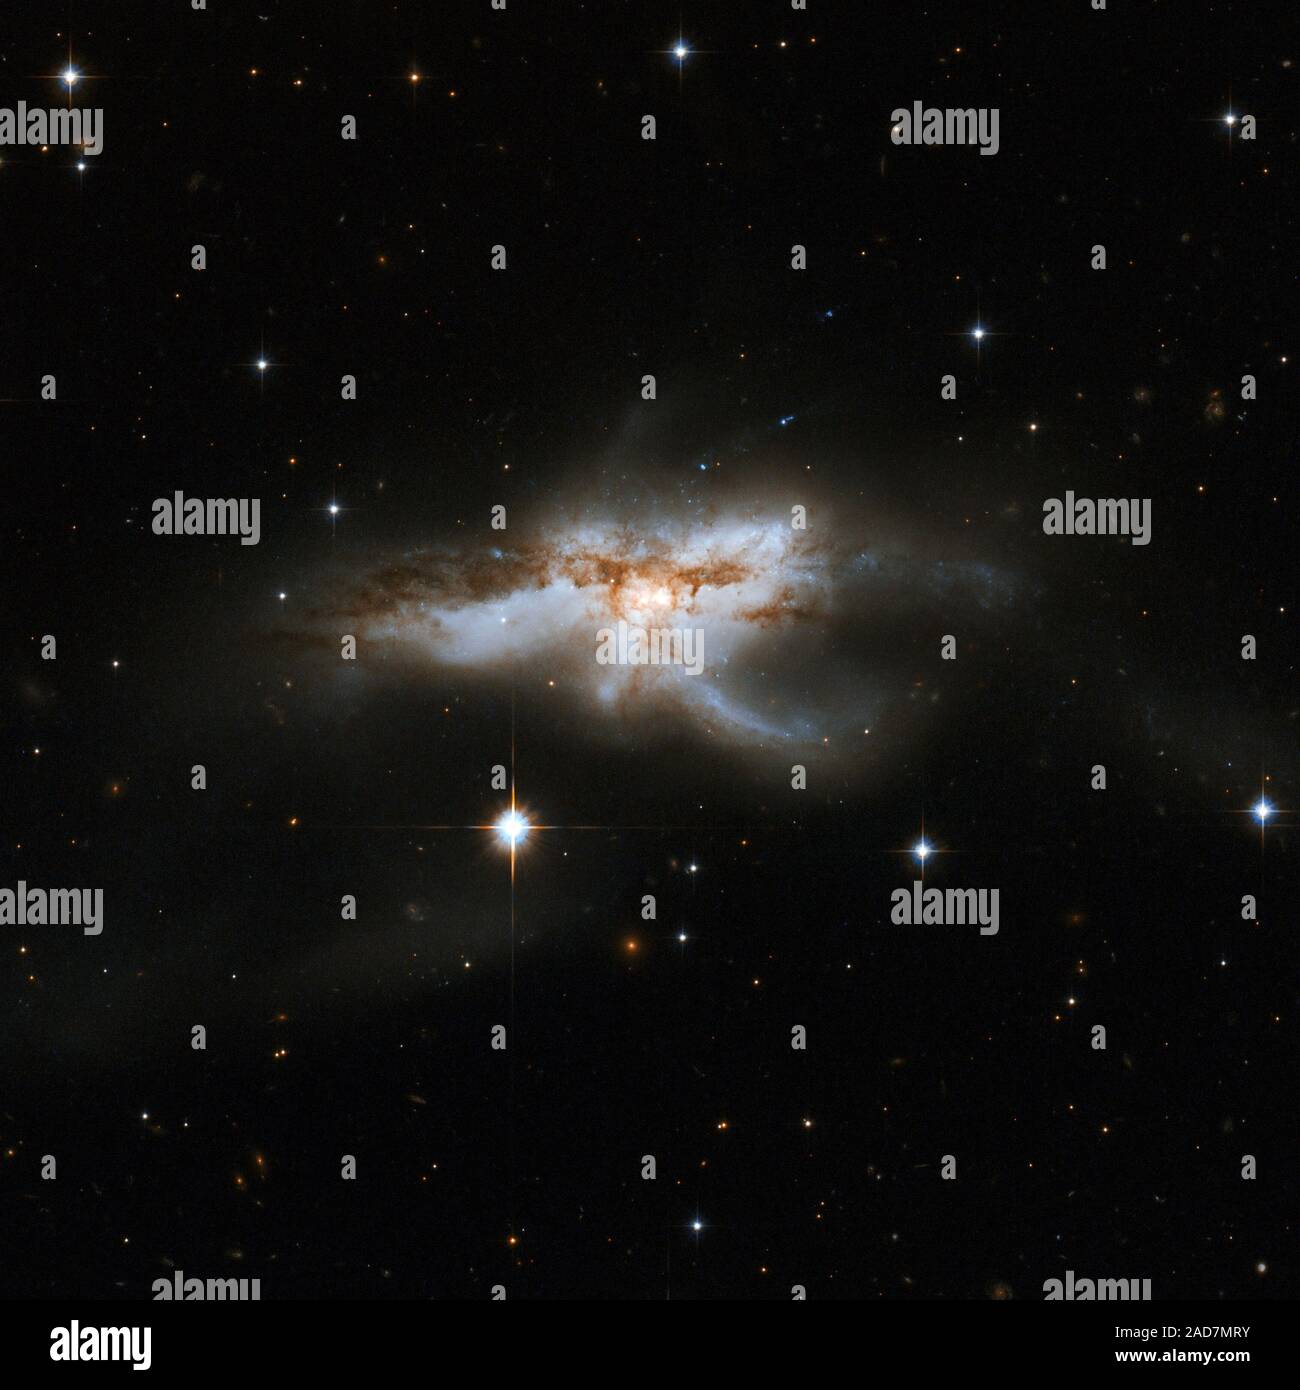 NGC 6240 is a peculiar, butterfly- or lobster-shaped galaxy consisting of  two smaller merging galaxies. It lies in the constellation of Ophiuchus,  the Serpent Holder, some 400 million light-years away. Observations with